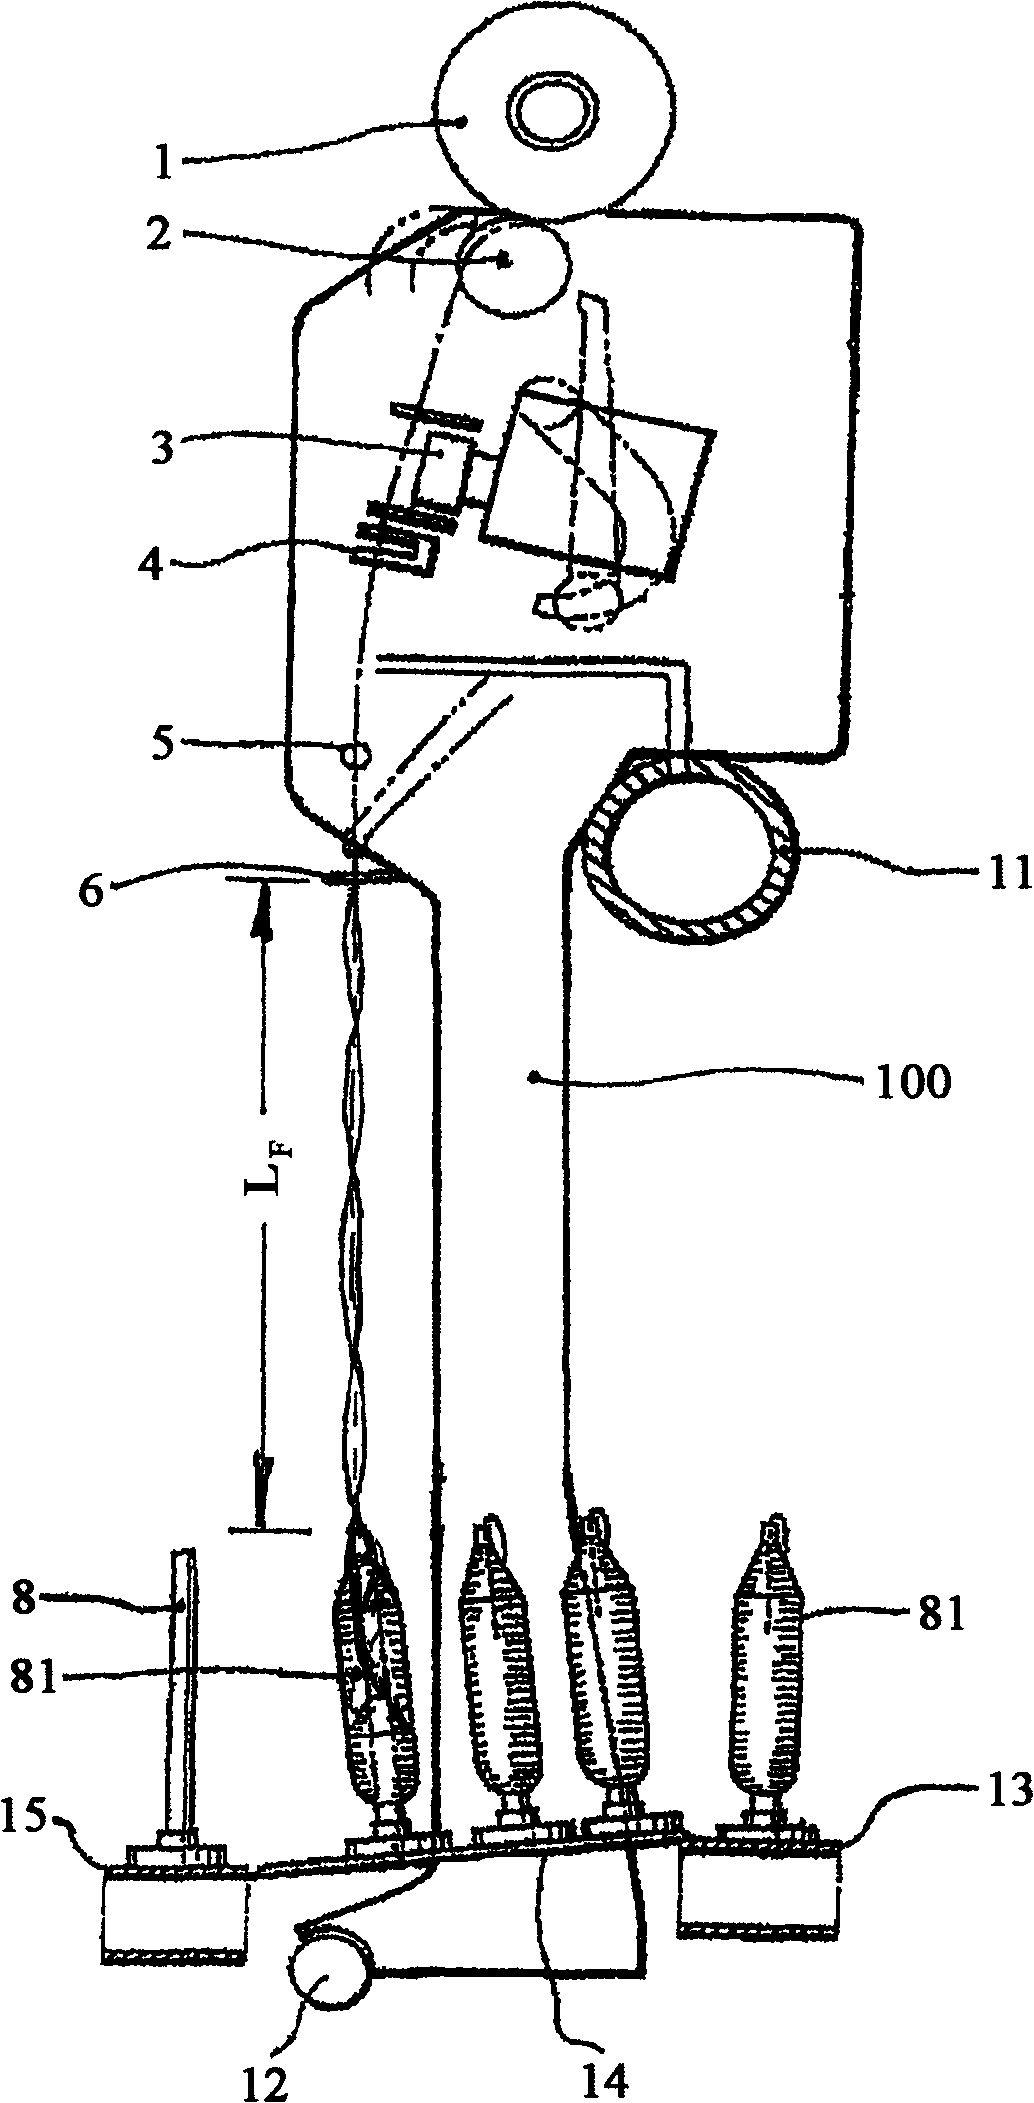 Process and device for rewinding feed spools